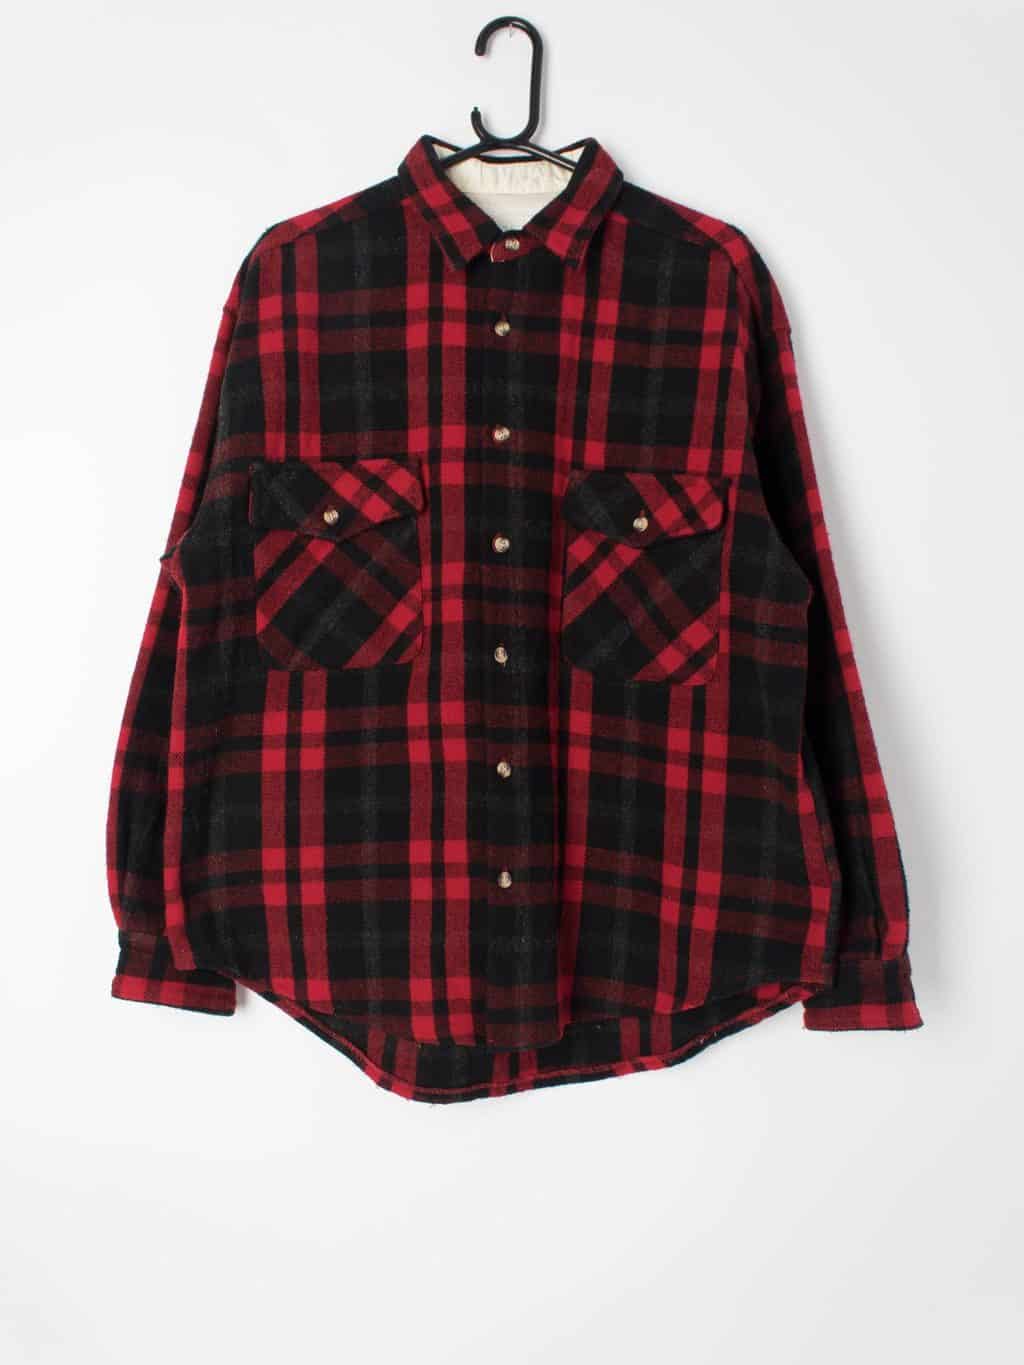 Mens vintage thick plaid shirt heavy weight red and black flannel ...